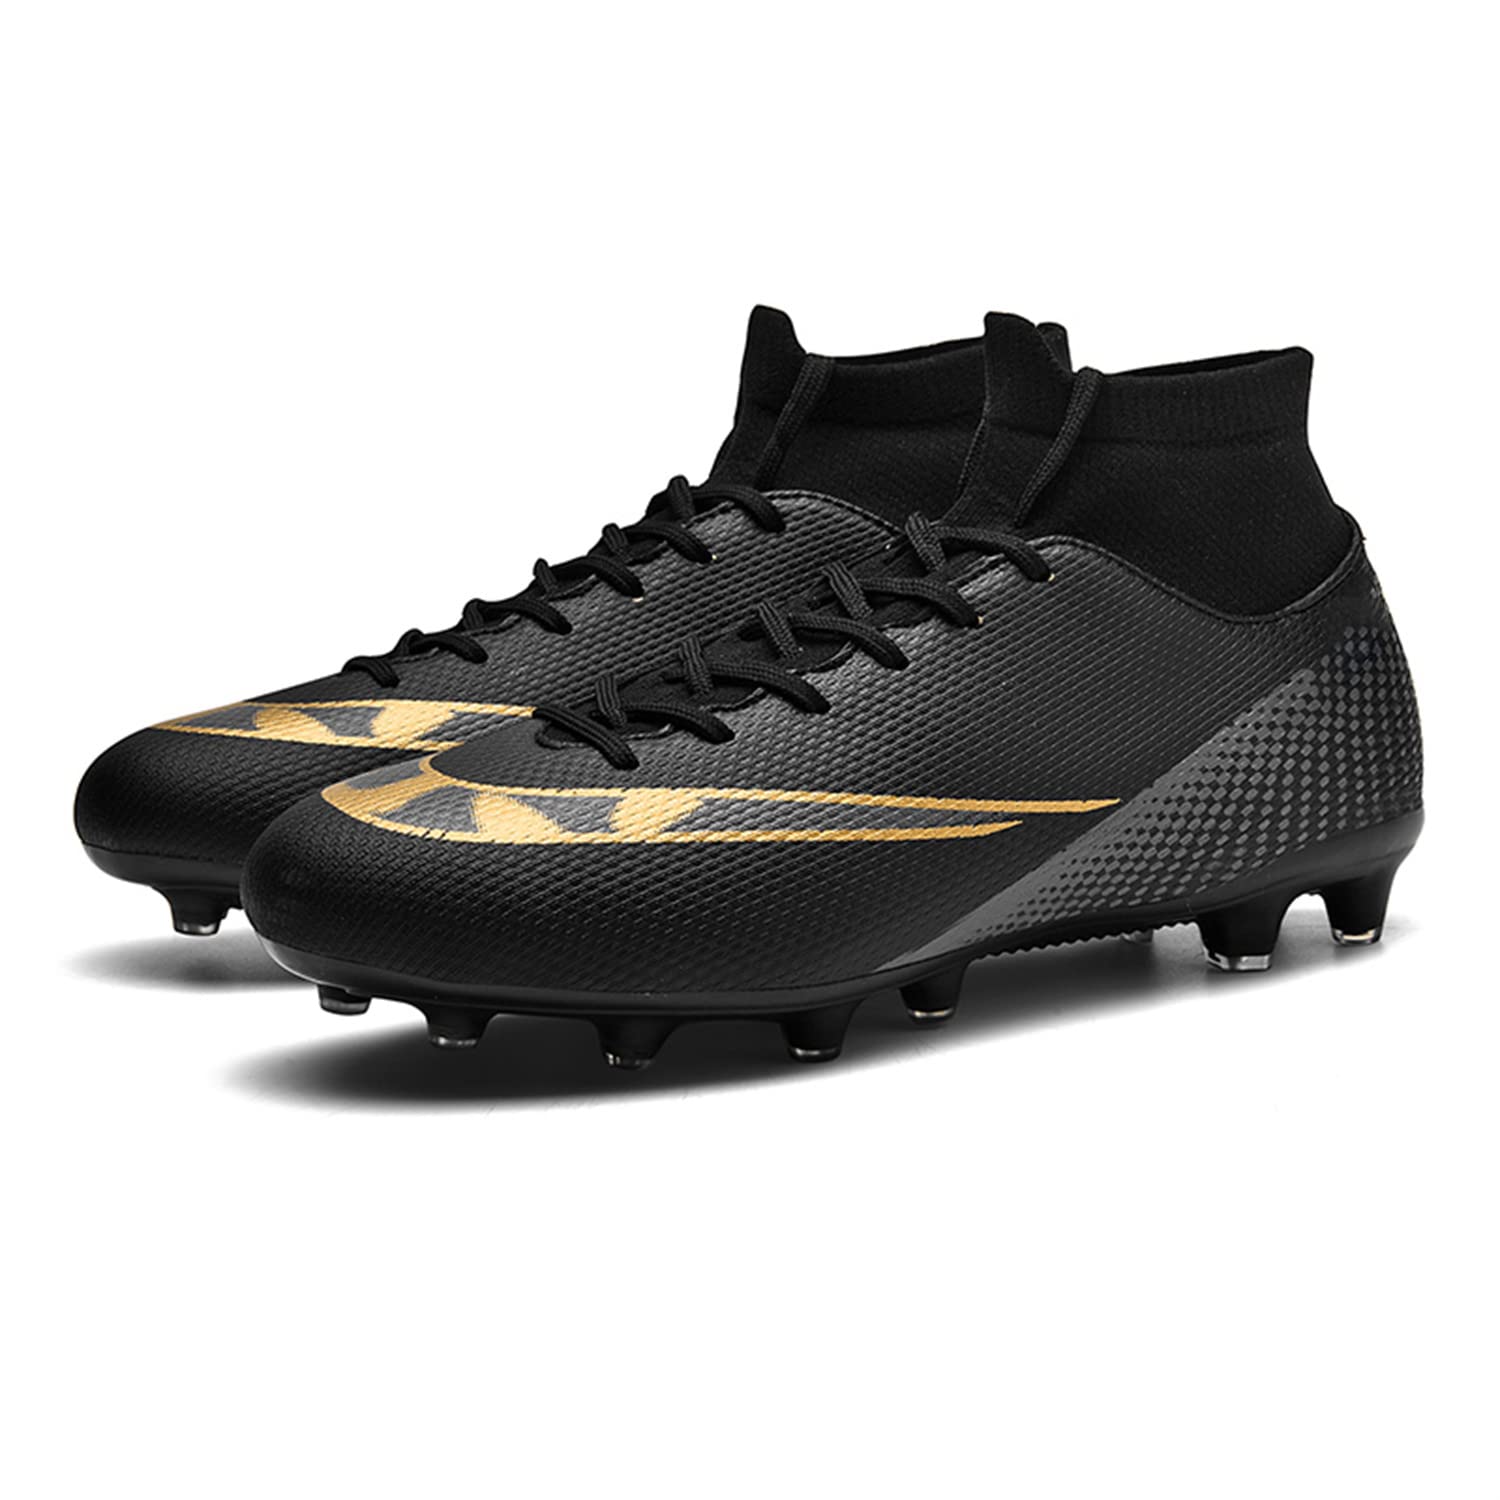 MDPCX Competitive Unisex Soccer Shoes Men Women Indoor Outdoor Football Boots Athletic Turf Mundial Team Cleat Running Sports Lightweight Breathable Anti-Skid Damping Shoes Black